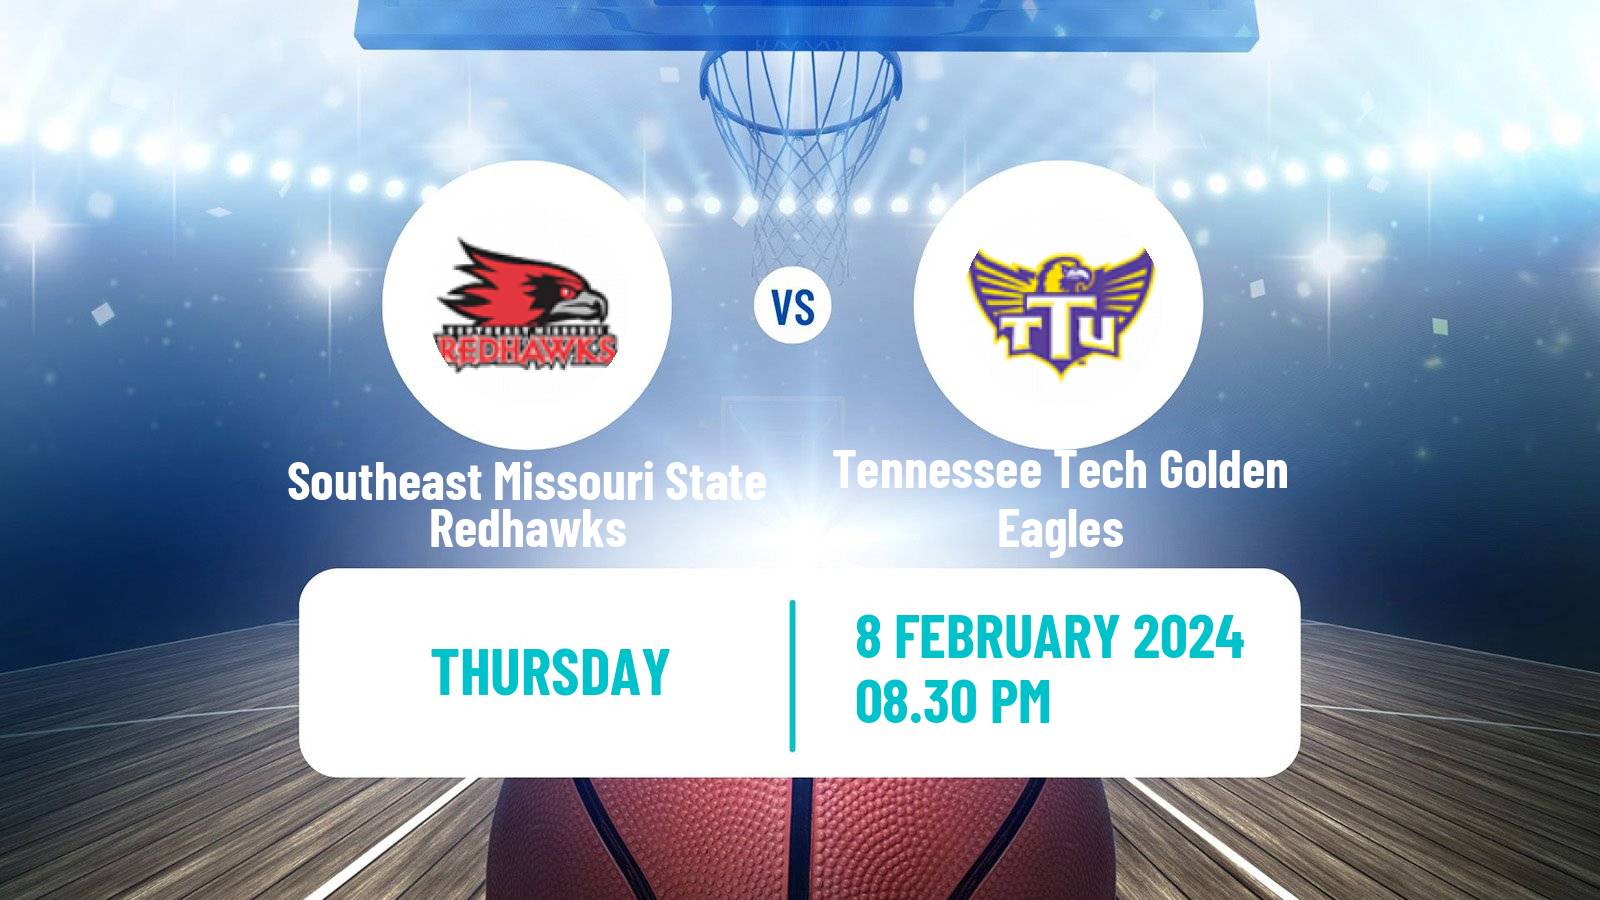 Basketball NCAA College Basketball Southeast Missouri State Redhawks - Tennessee Tech Golden Eagles